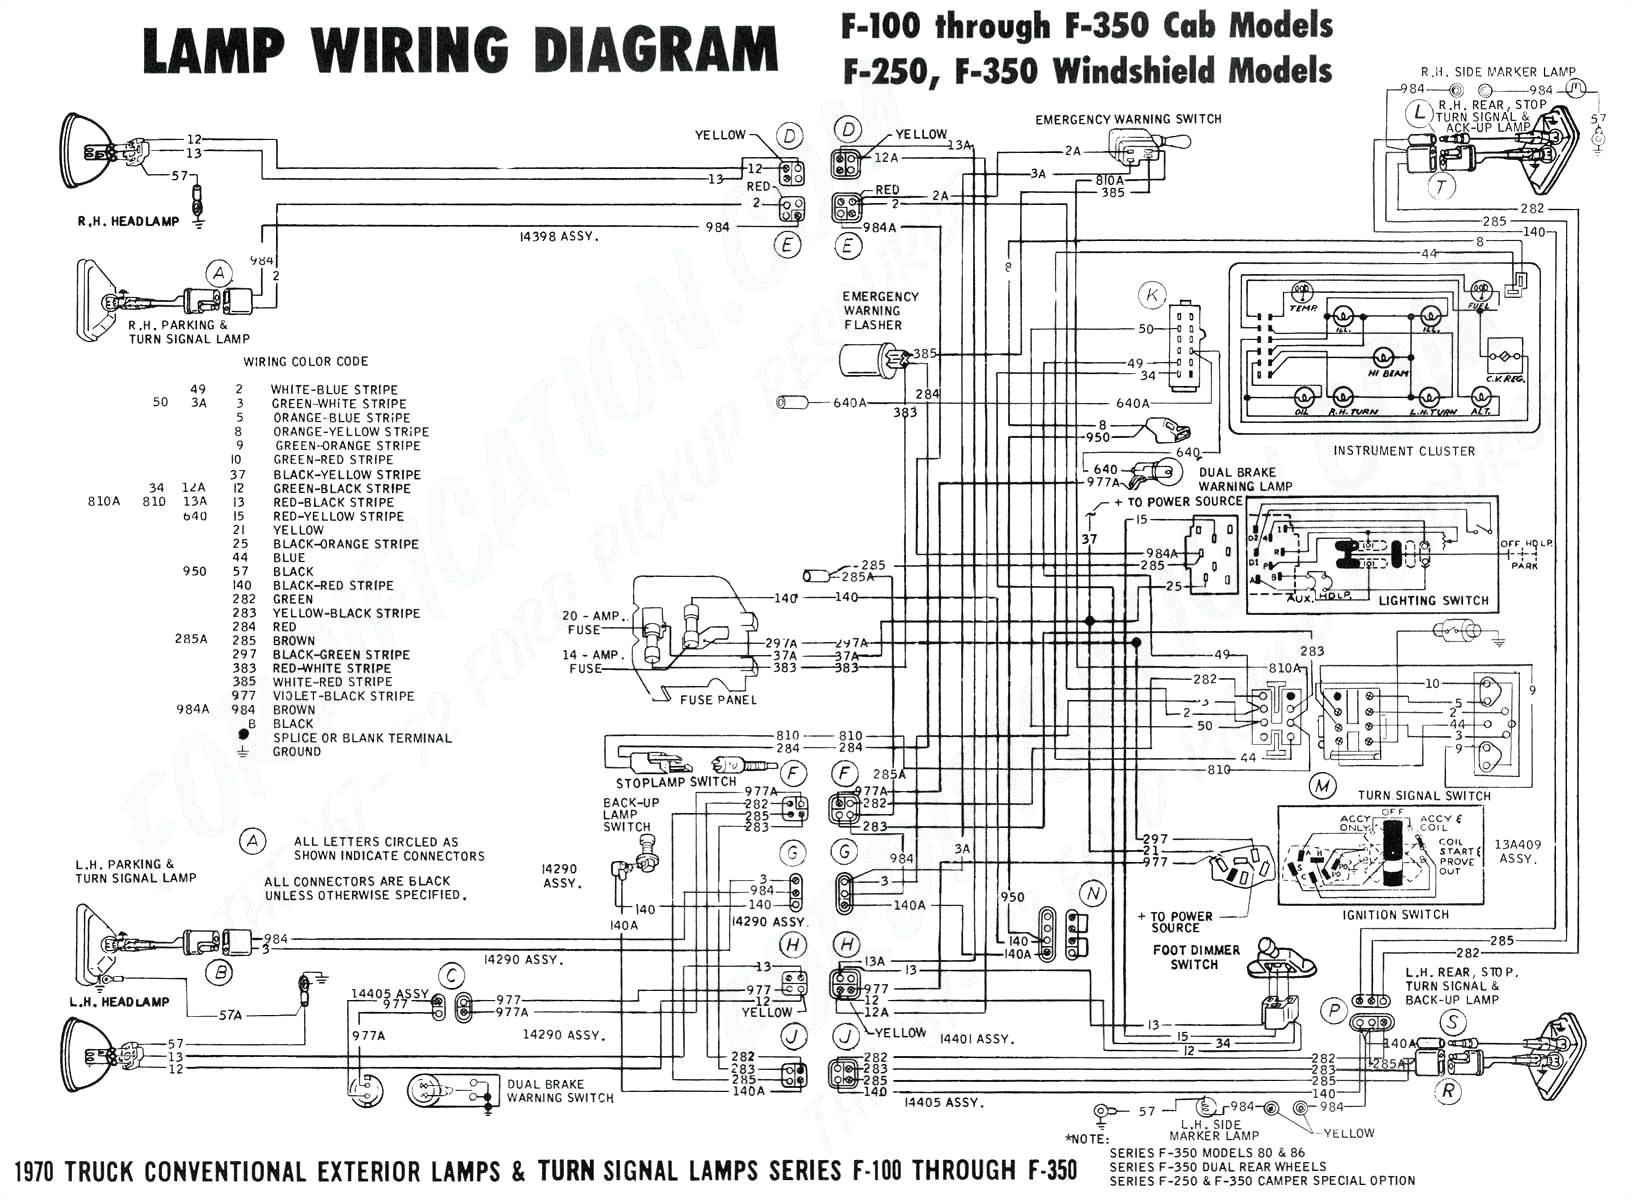 Ford Stereo Wiring Diagram 82 ford Fairmont Stereo Wiring Color Codes Wiring Diagram Operations